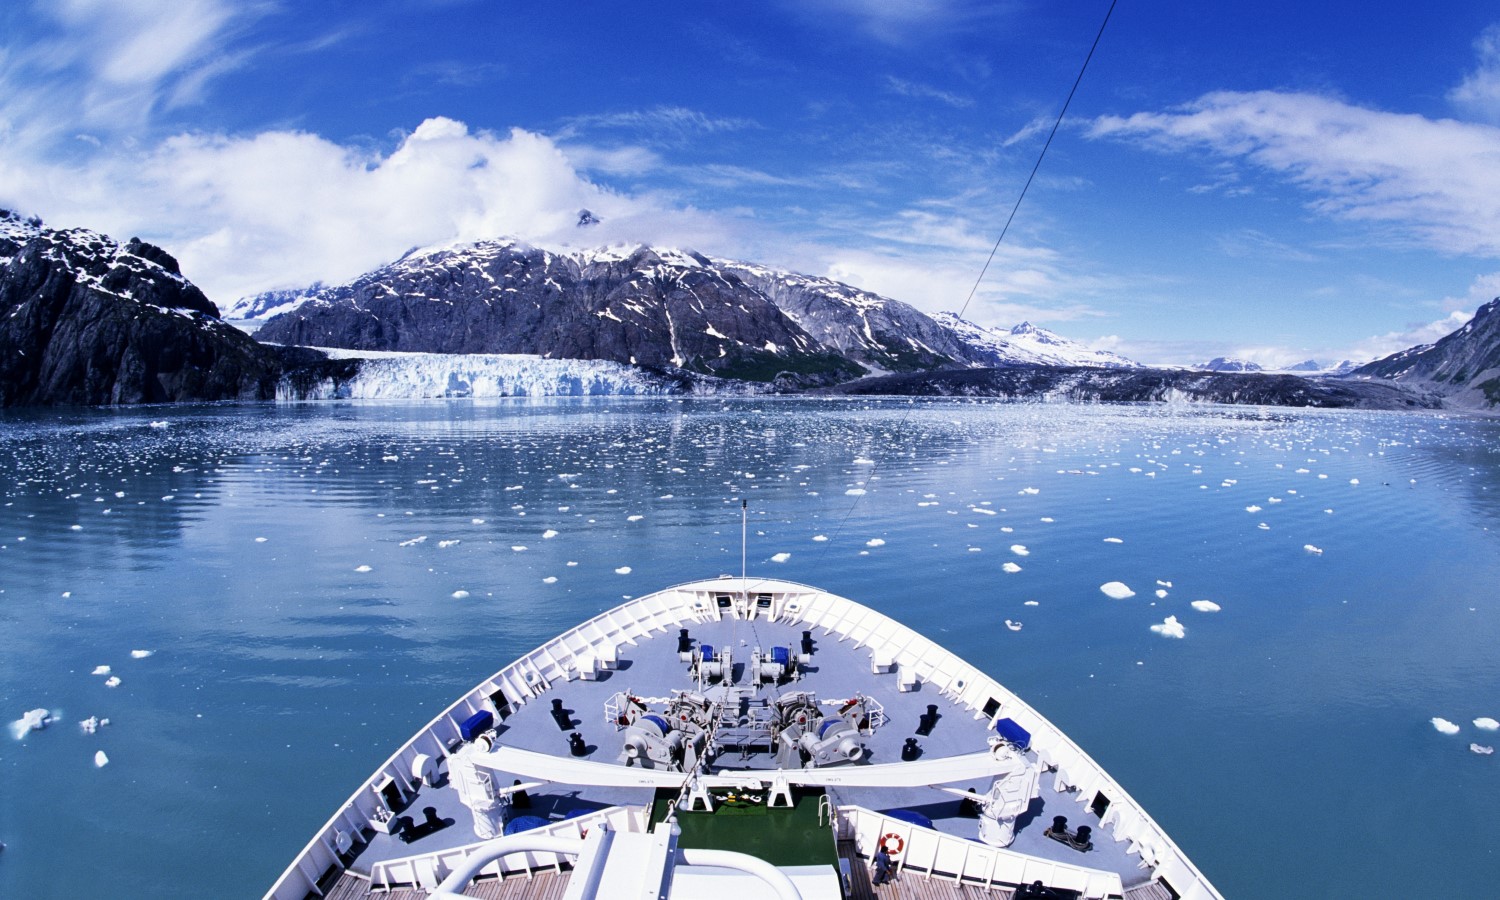 Front of a cruise ship on blue water with black and snow capped mountains.